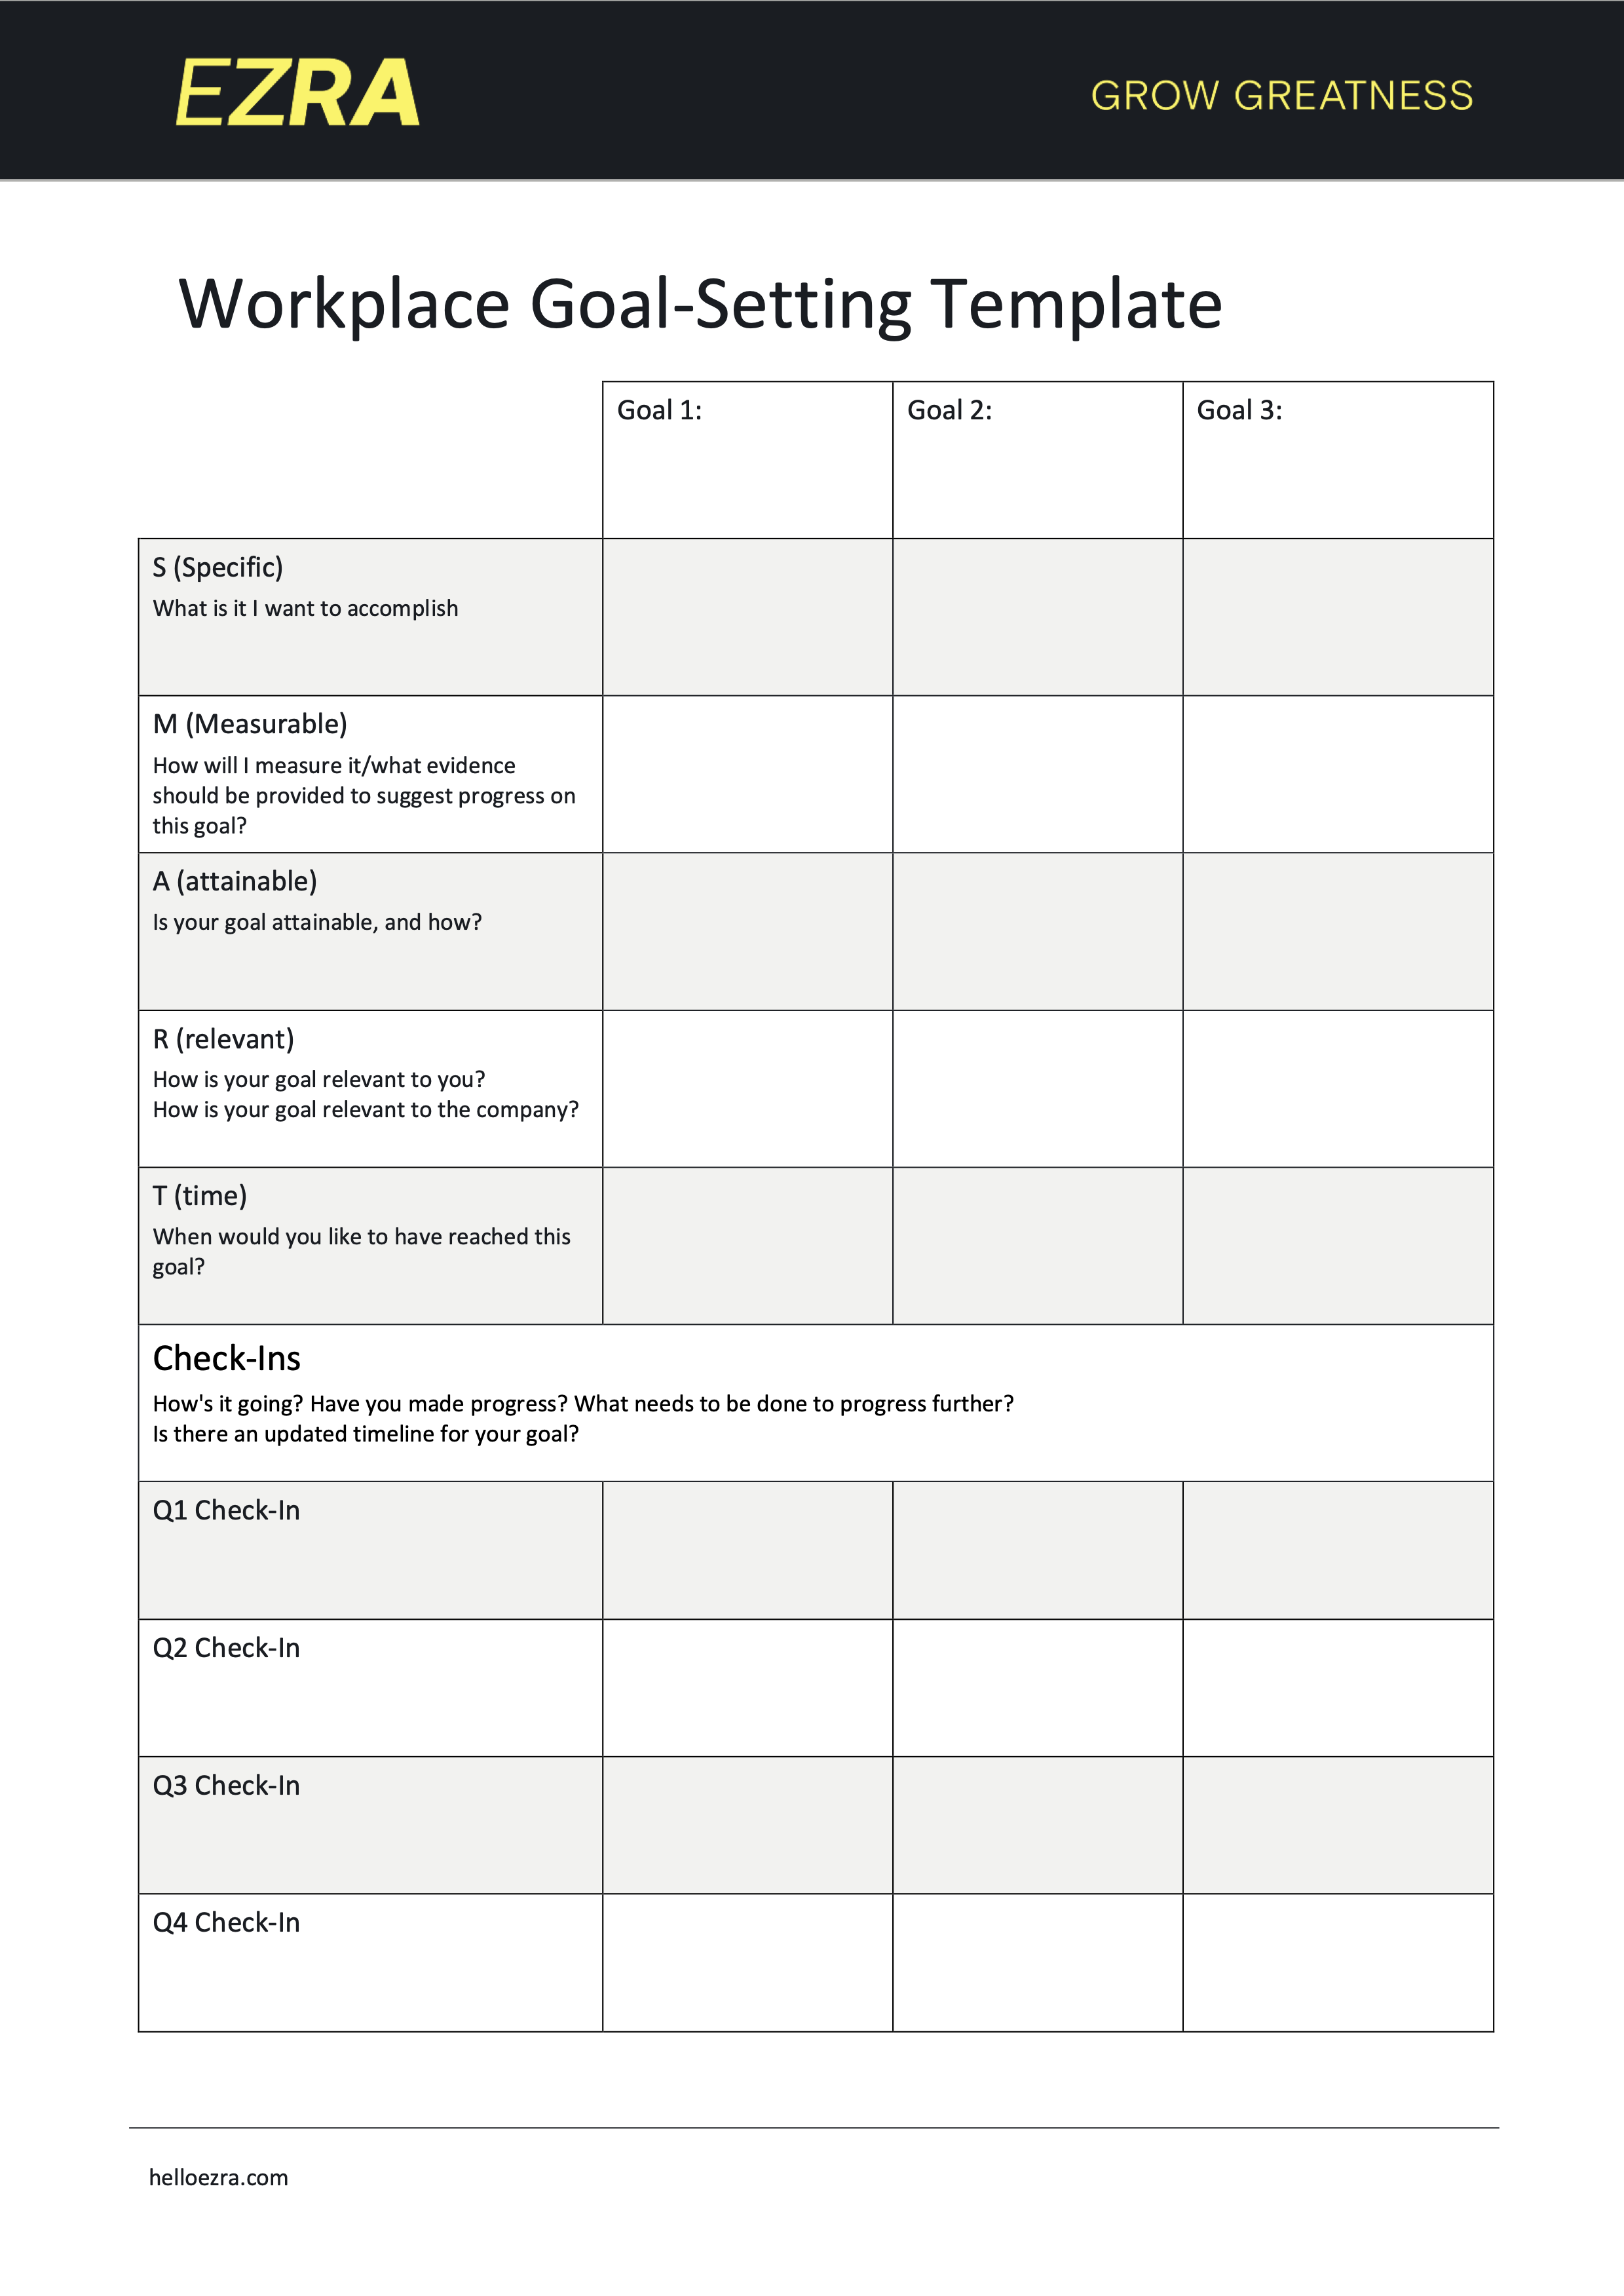 Workplace goal-setting template based on the SMART method — Specific, Measurable, Attainable, Relevant, and Time.